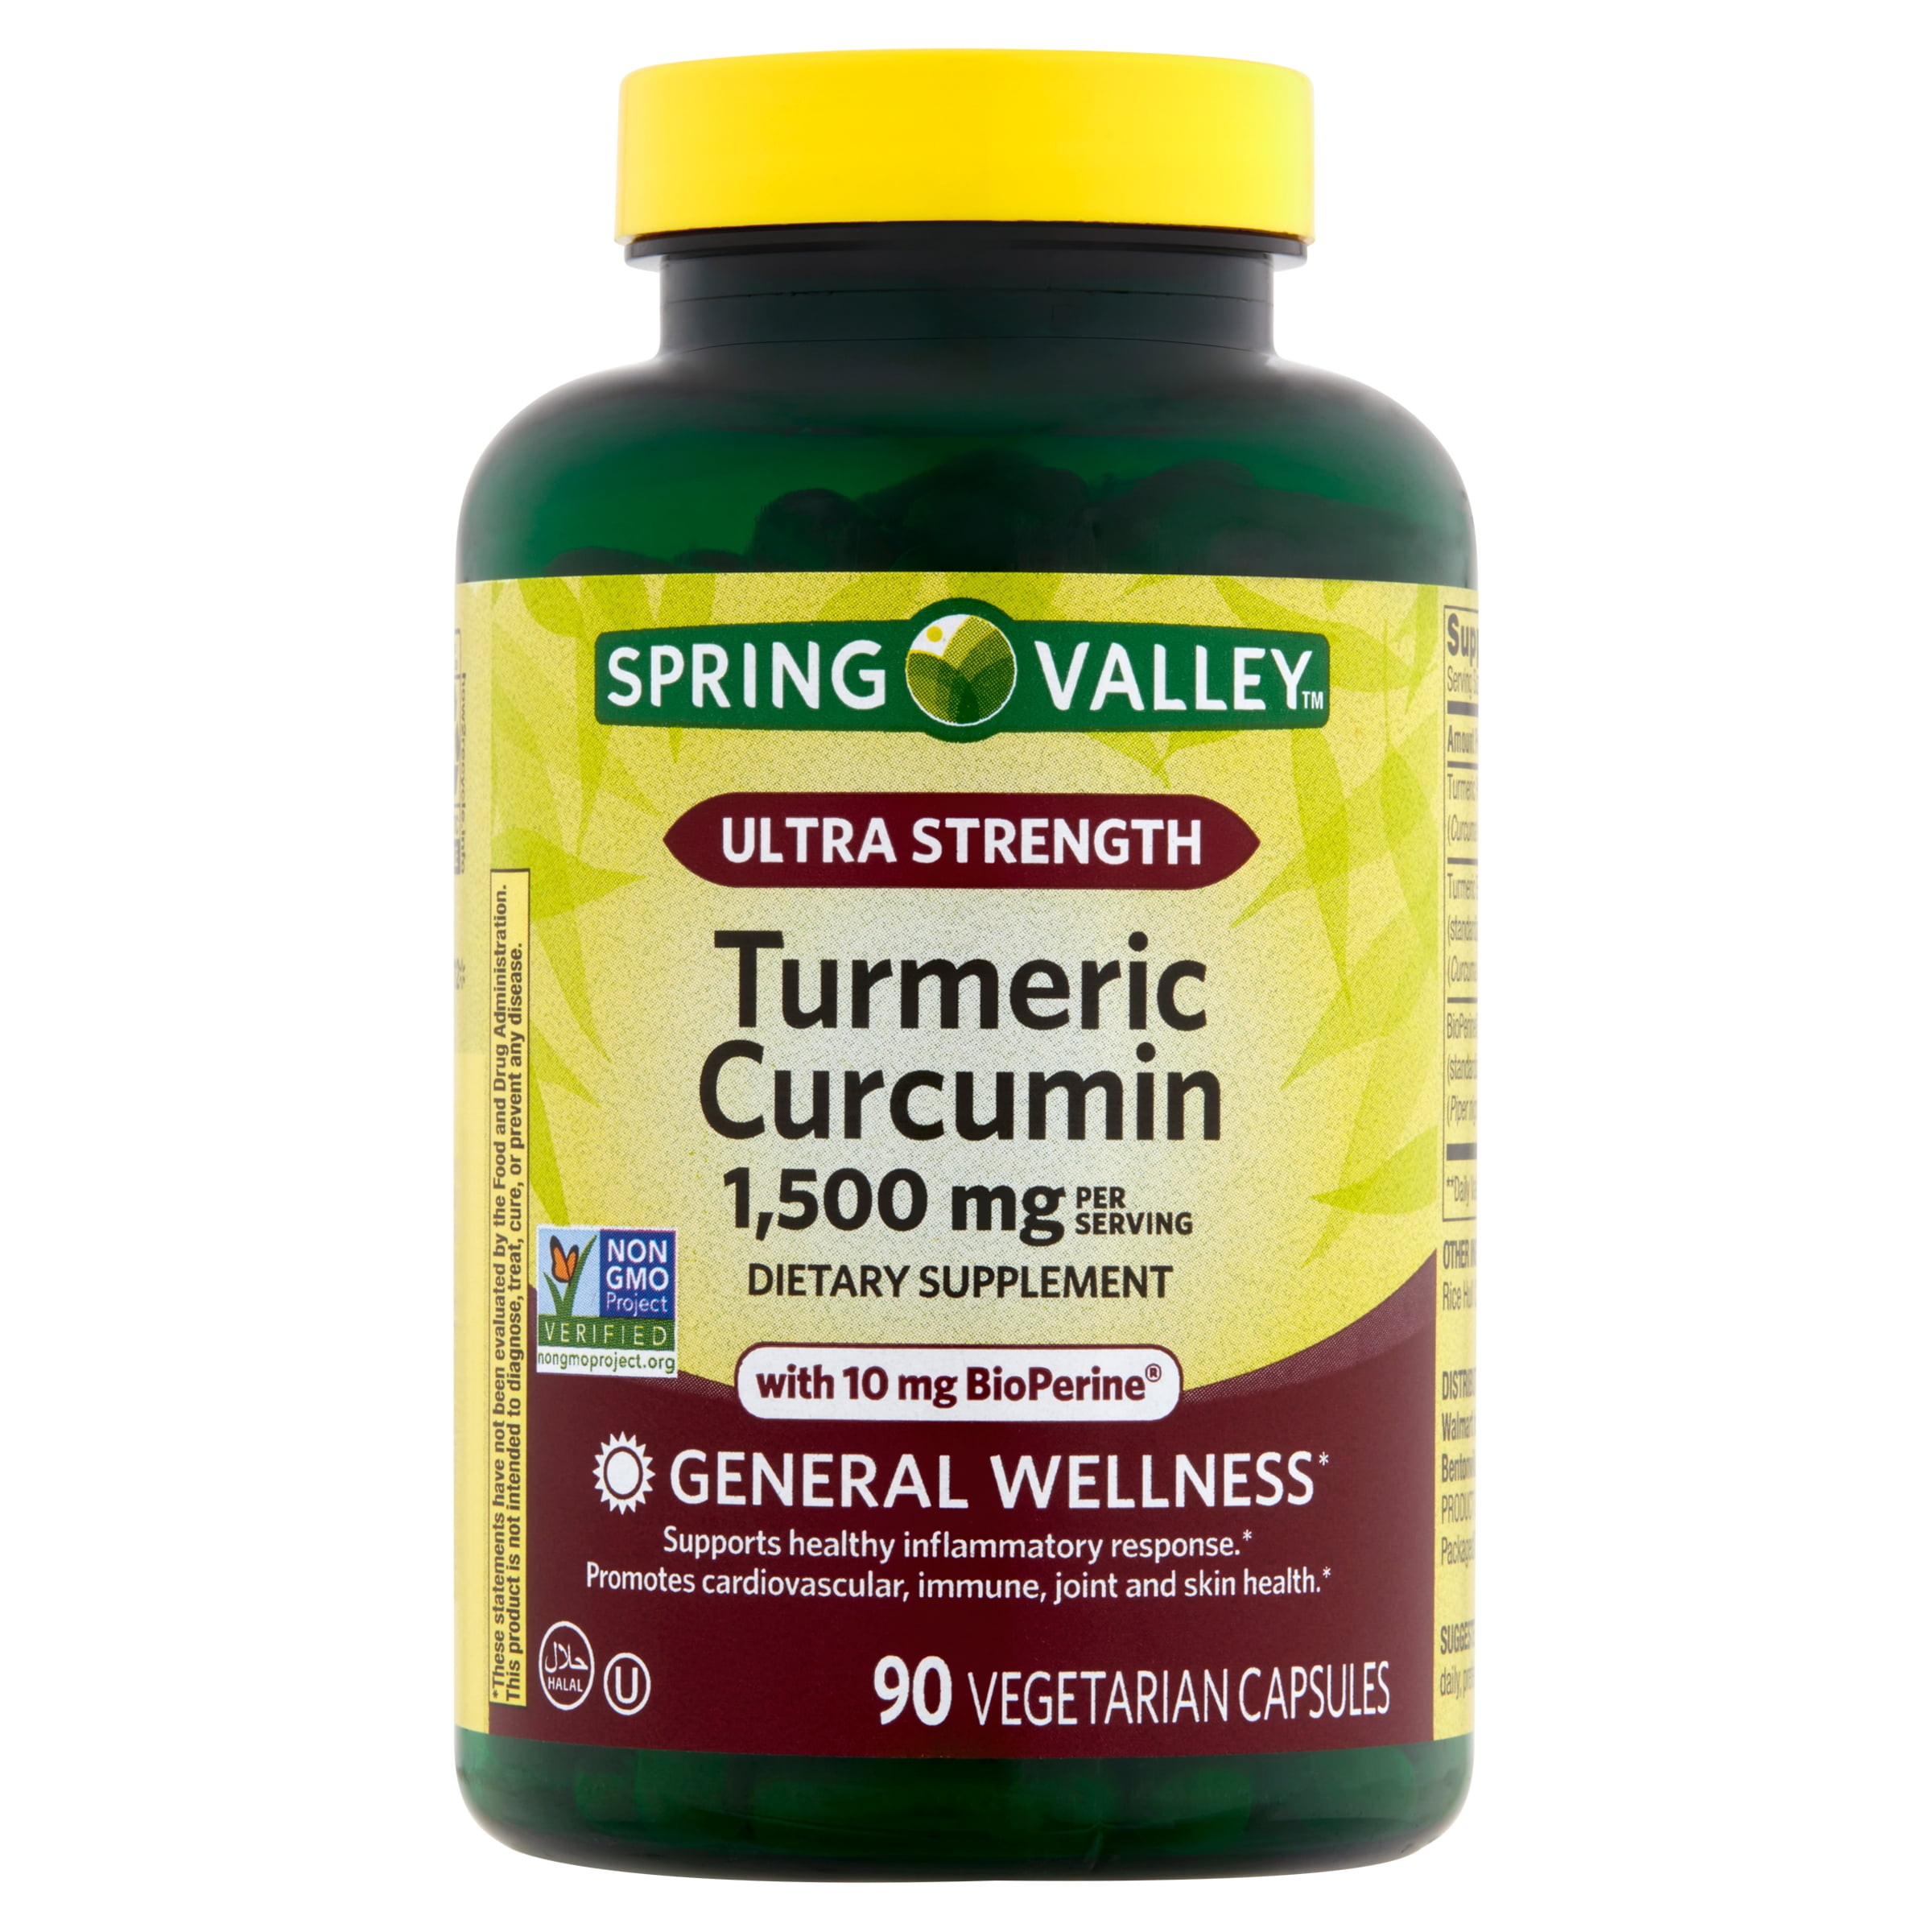 Spring Valley Ultra Strength Turmeric Curcumin Dietary Supplement, 1,500 mg, 90 count